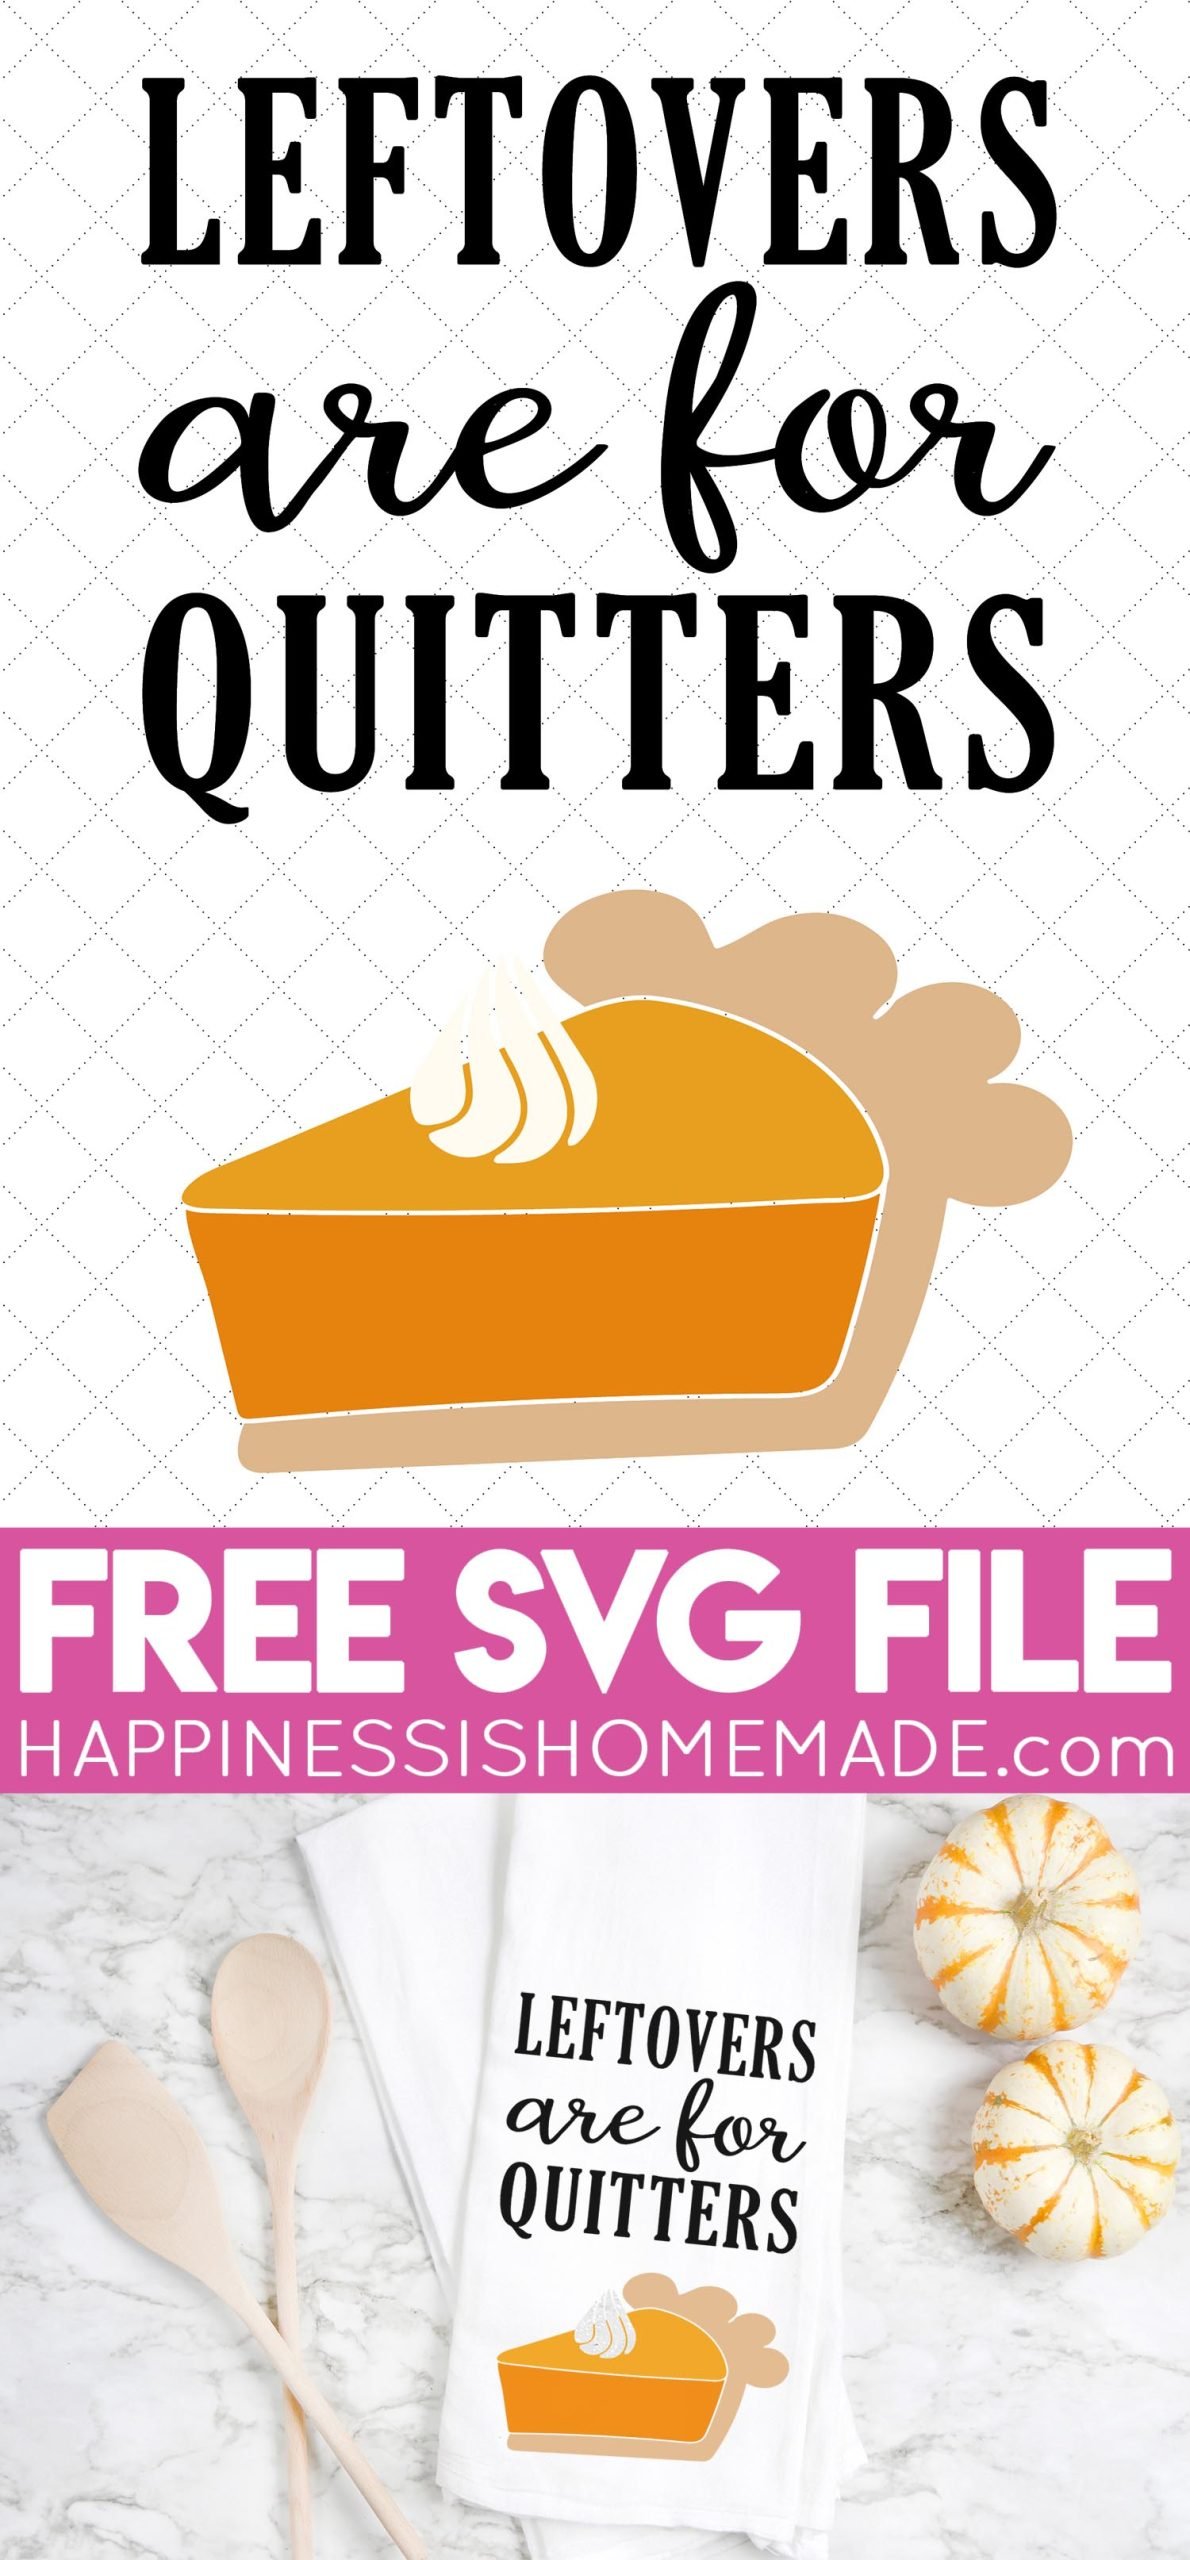  Leftovers are for Quitters SVG File pin